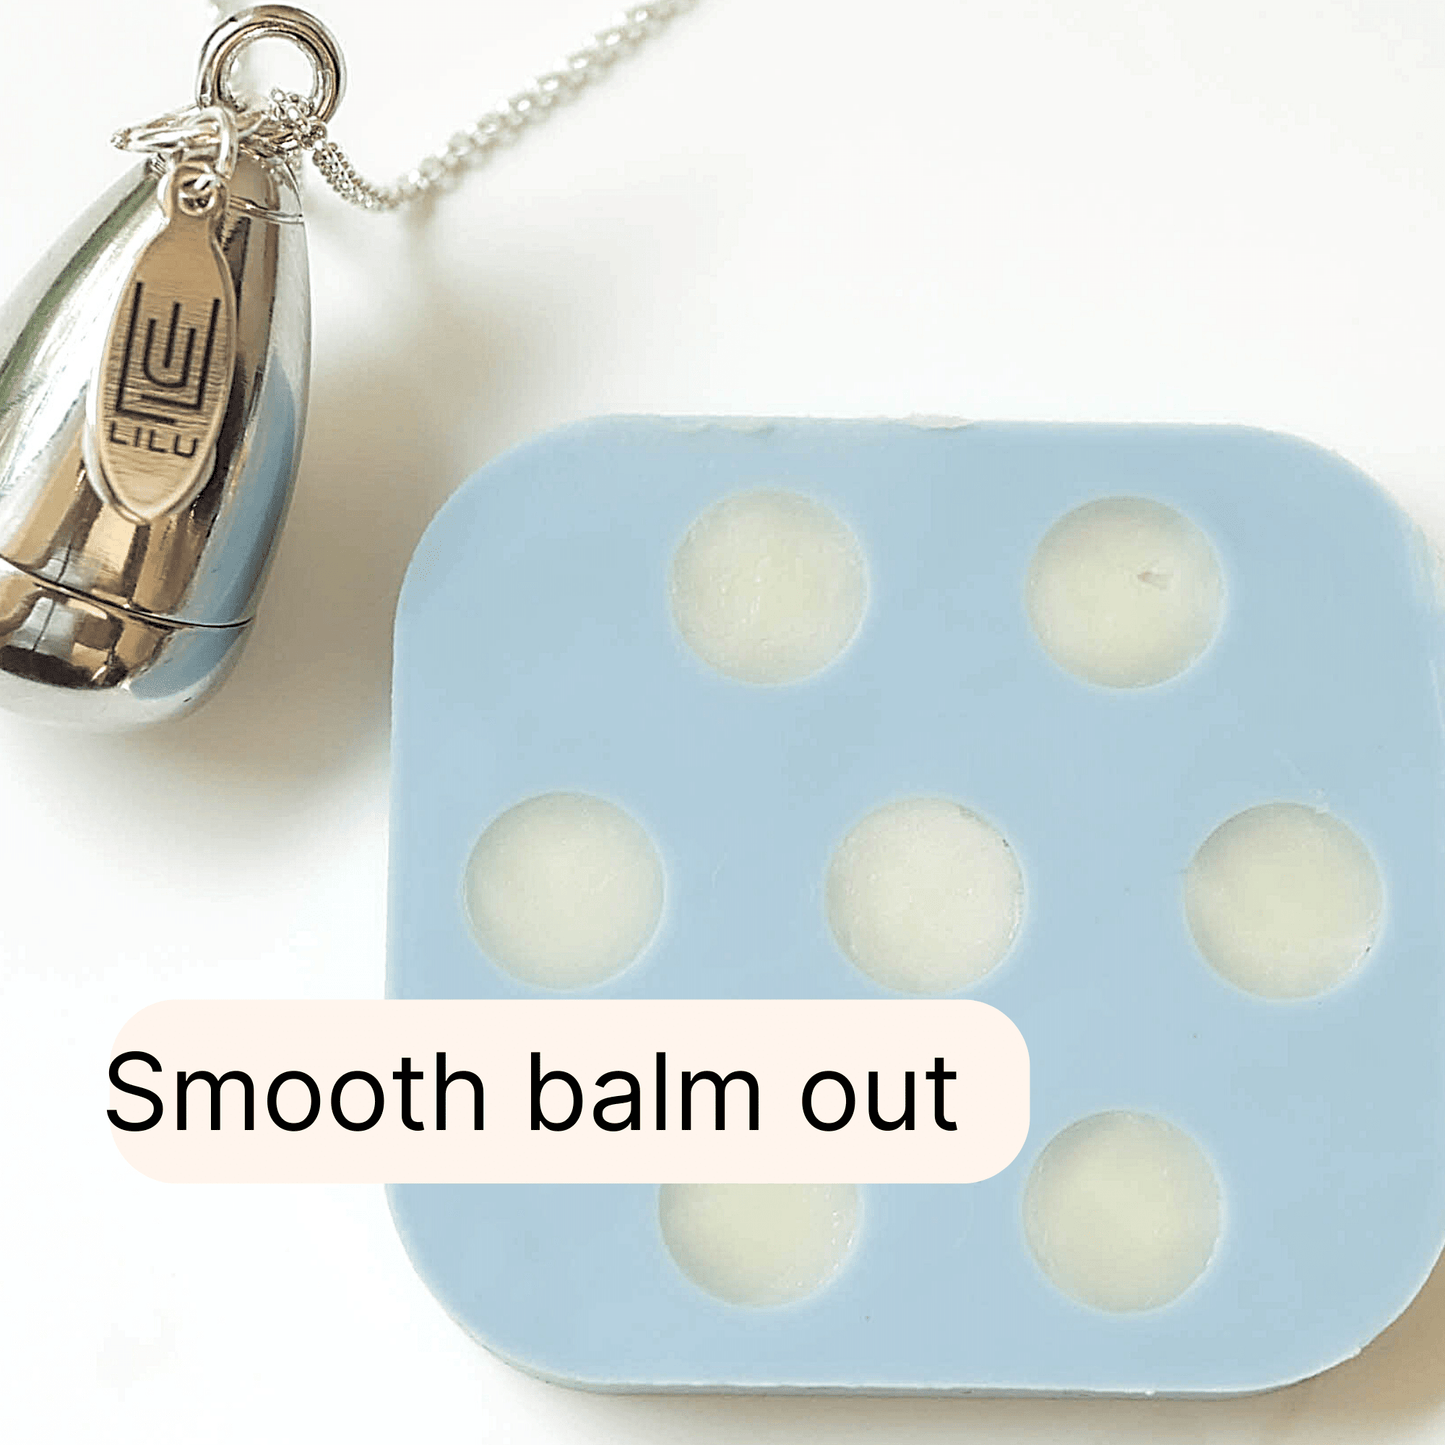 LiLu Lip Balm Necklace 2 Minute Easy DIY Kit Use Your Own Lip Balm